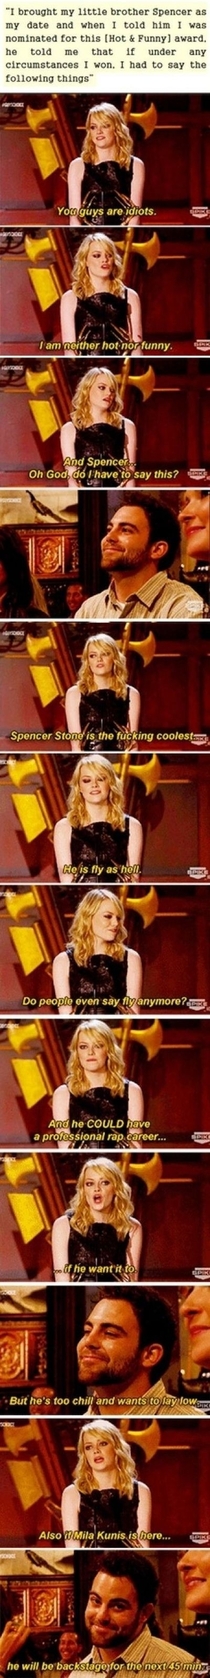 Emma Stone is the best older sister ever